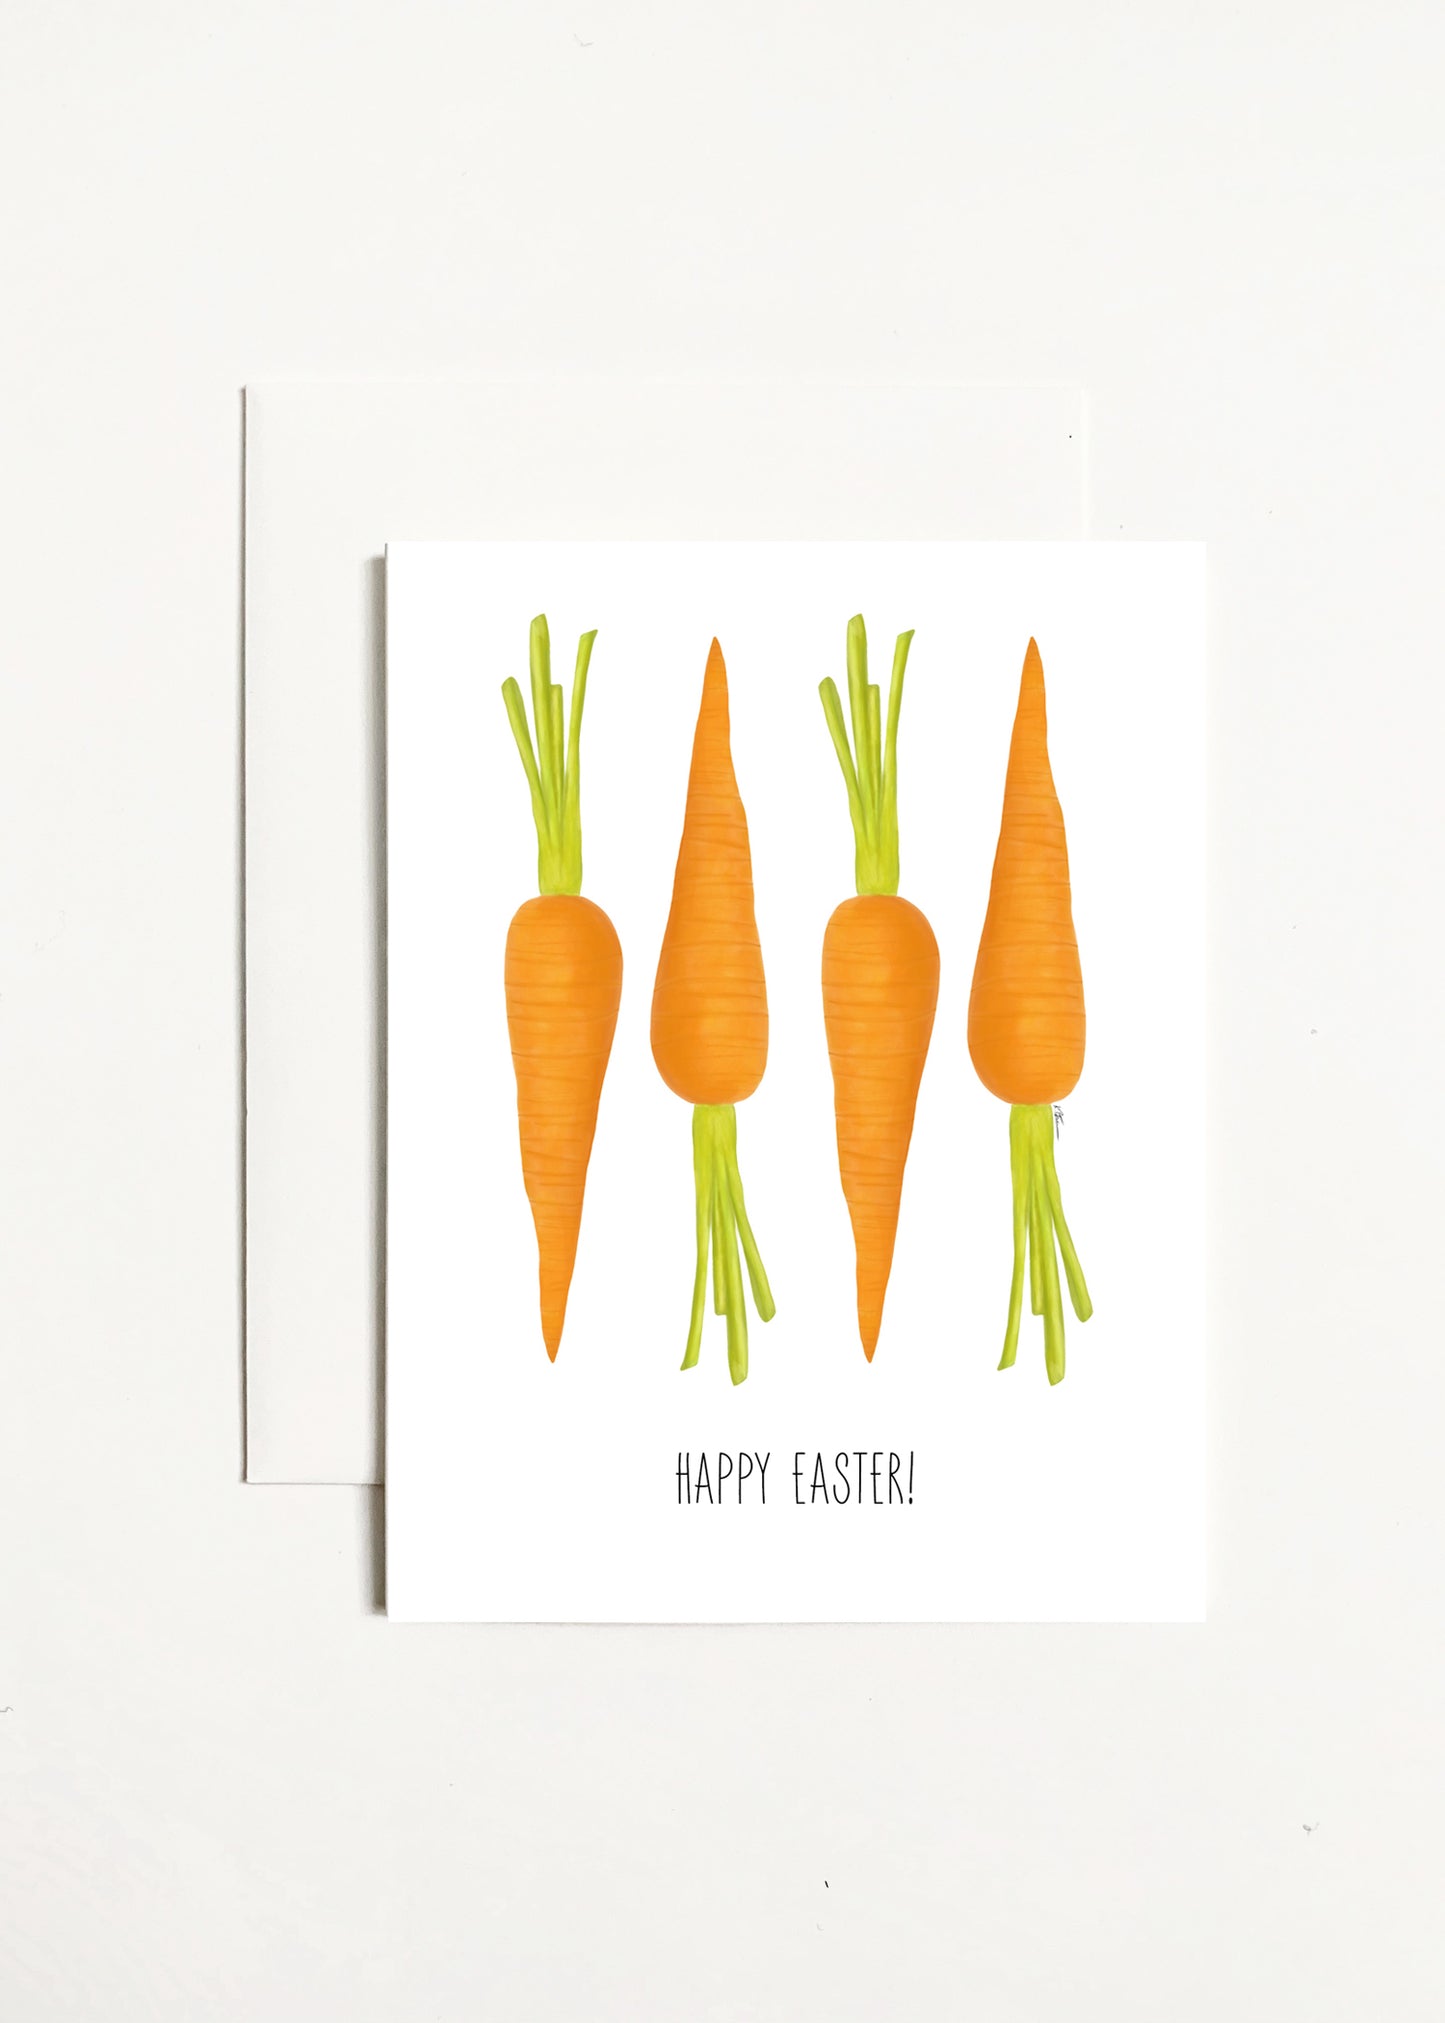 Happy Easter! - Carrots